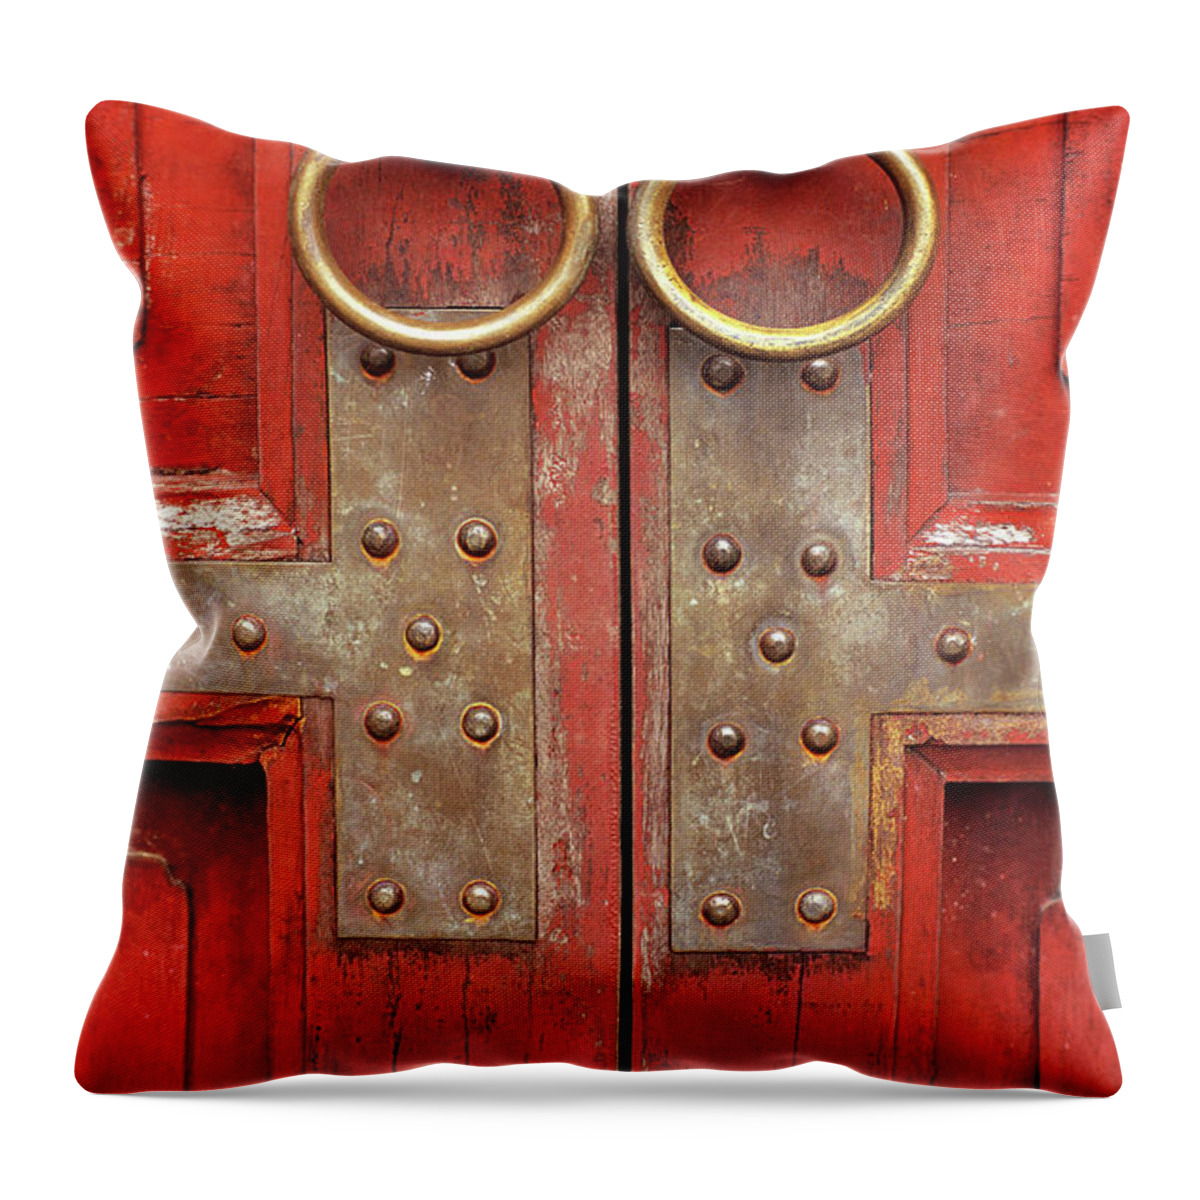 Vietnam Throw Pillow featuring the photograph Red Doors 02 by Rick Piper Photography